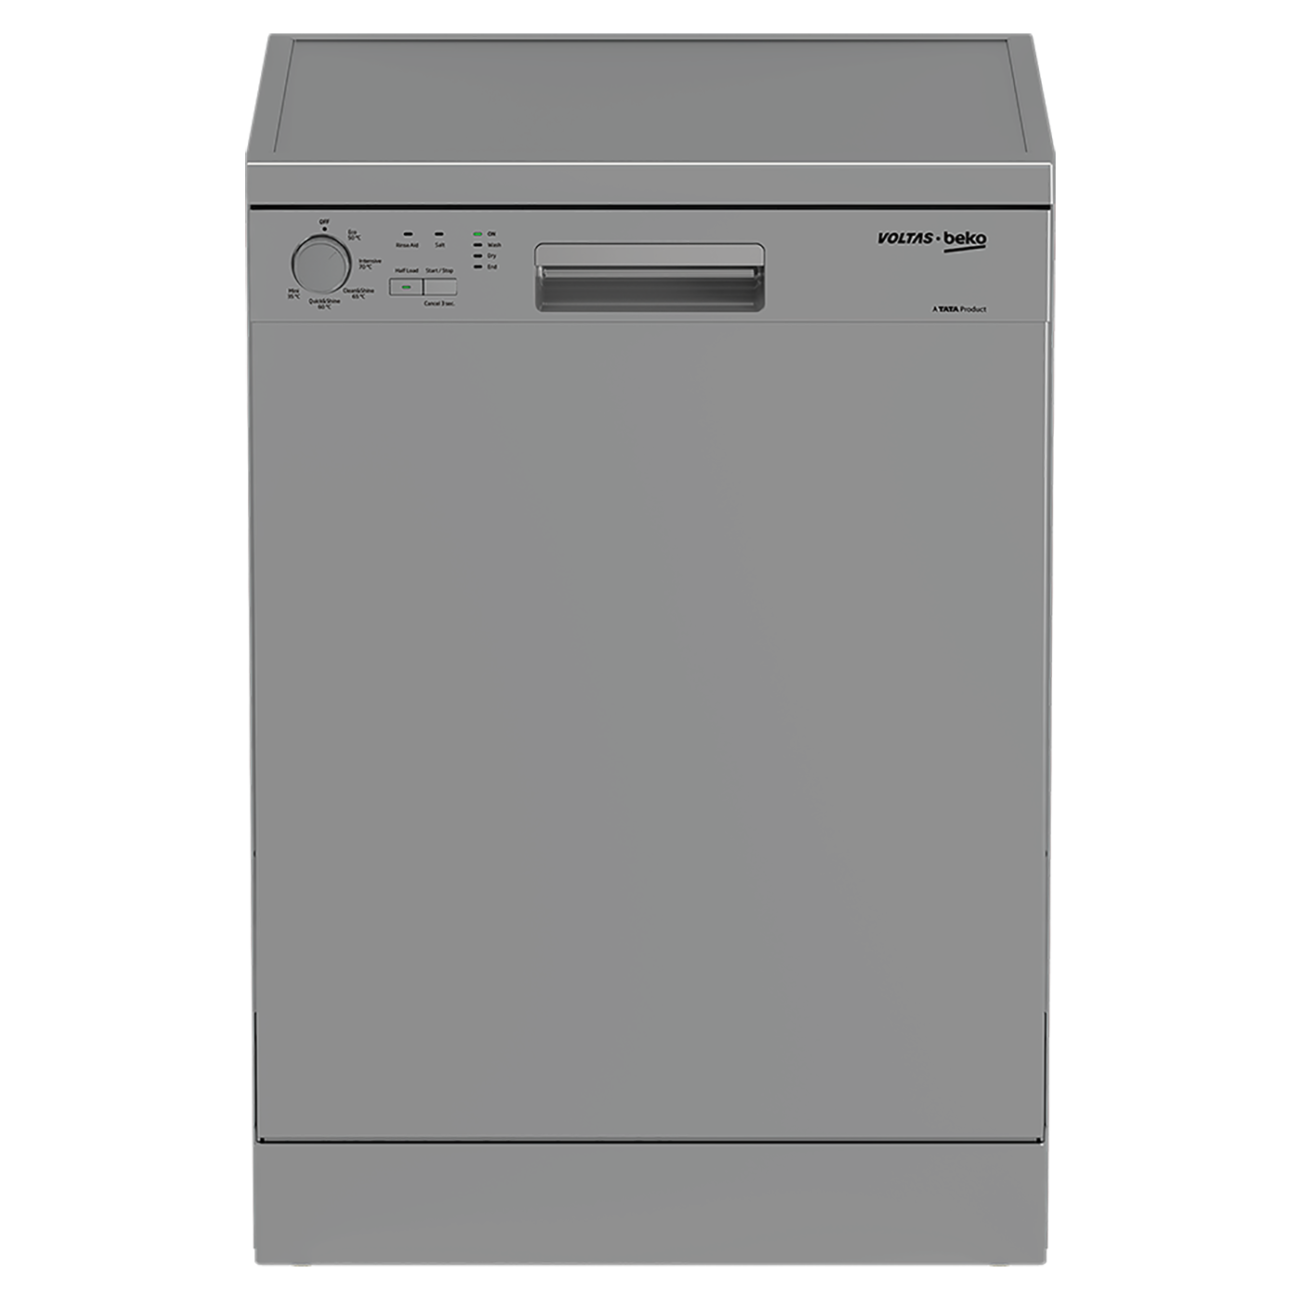 VOLTAS - 14-PS-Full-Size-Dishwasher-Silver-DF14S3